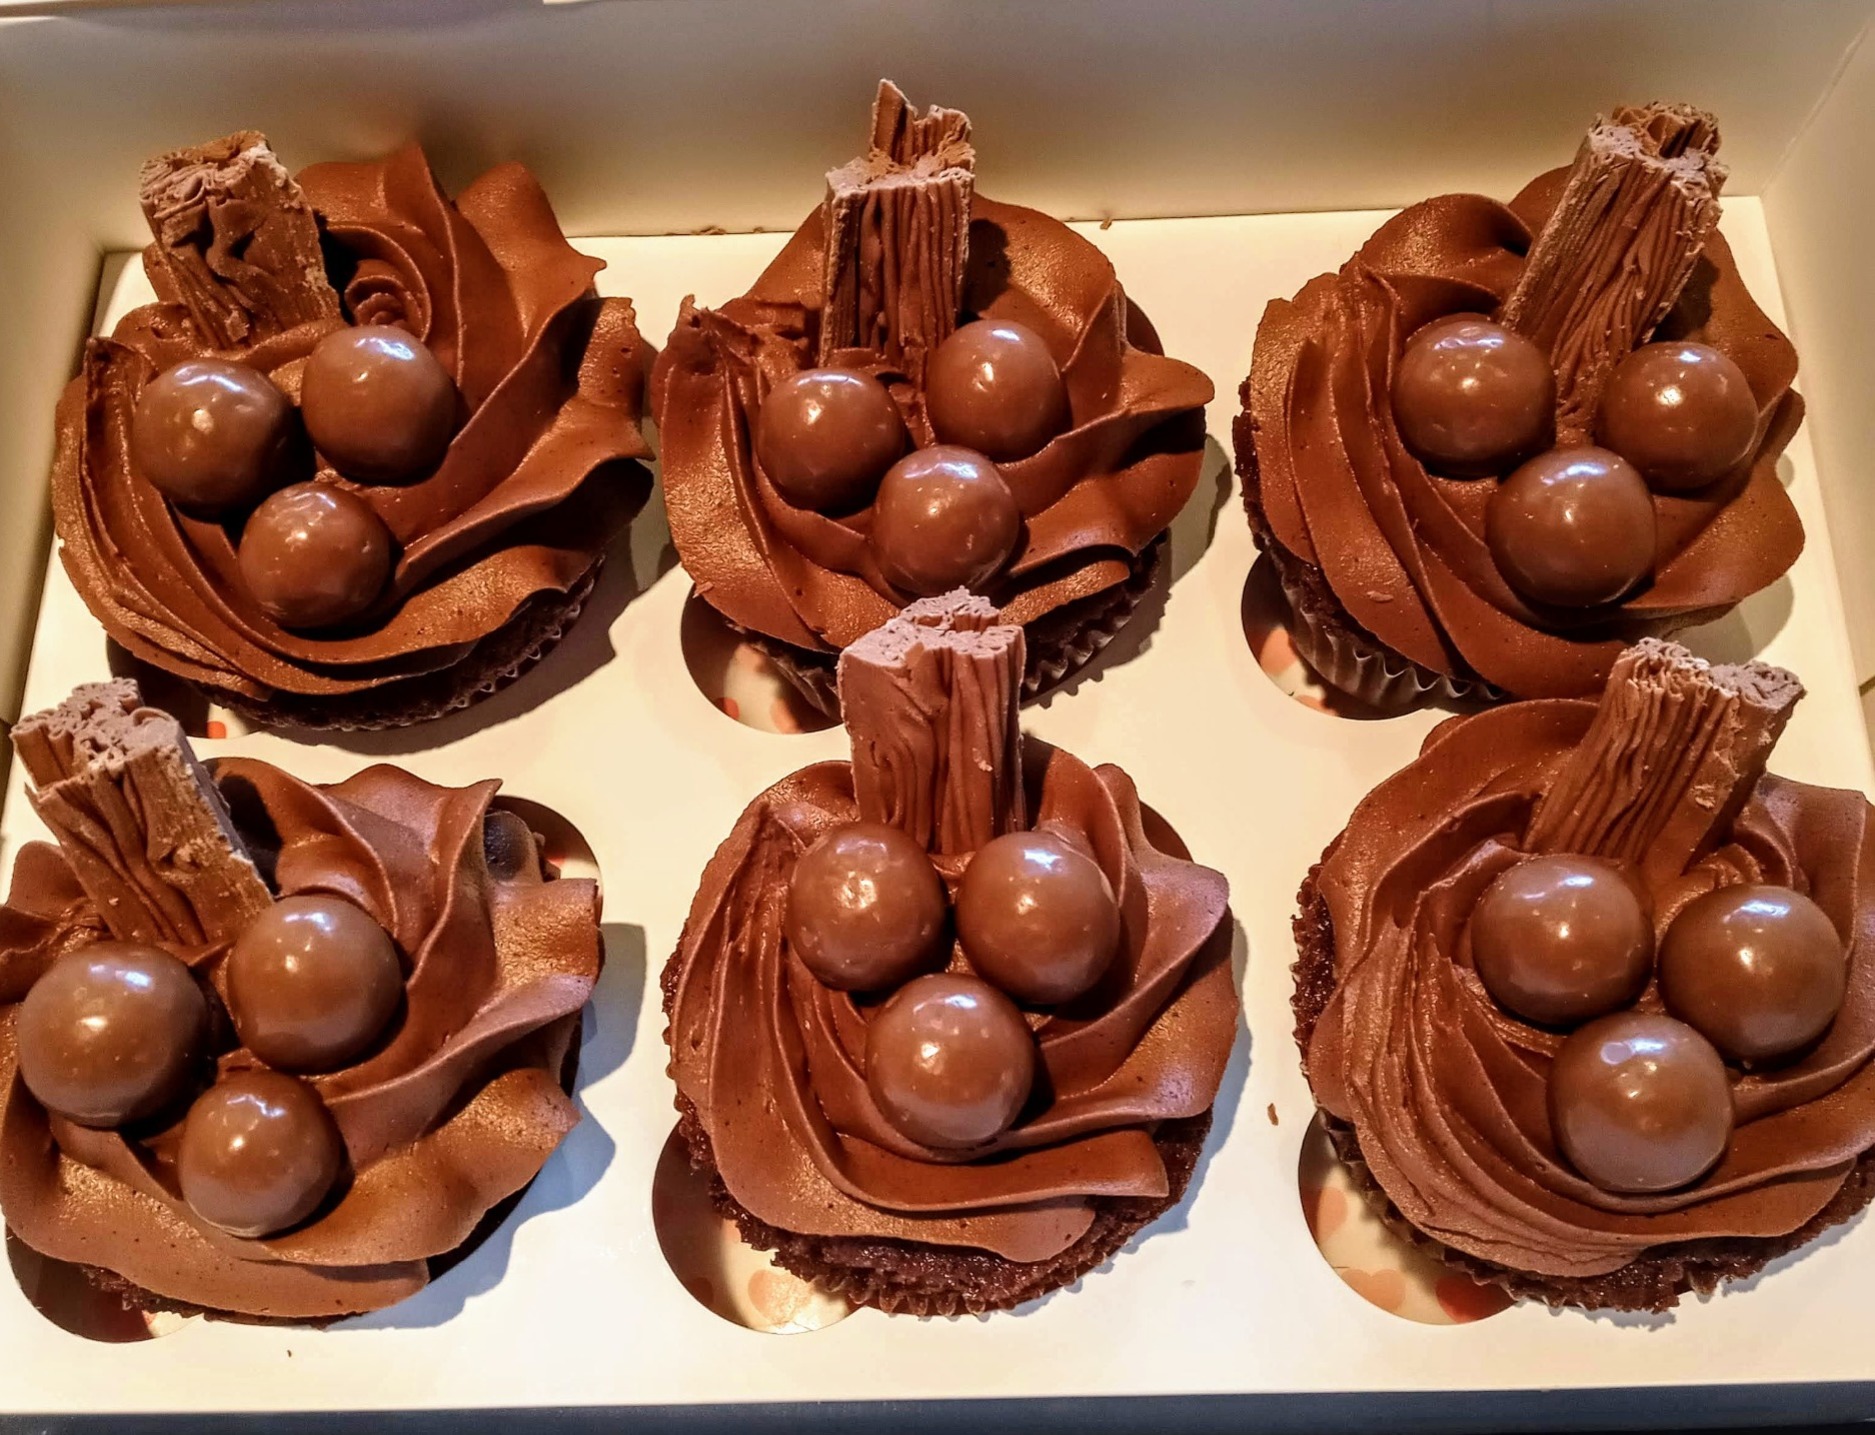 Chocolate sponge cupcakes with flake and malteser topping